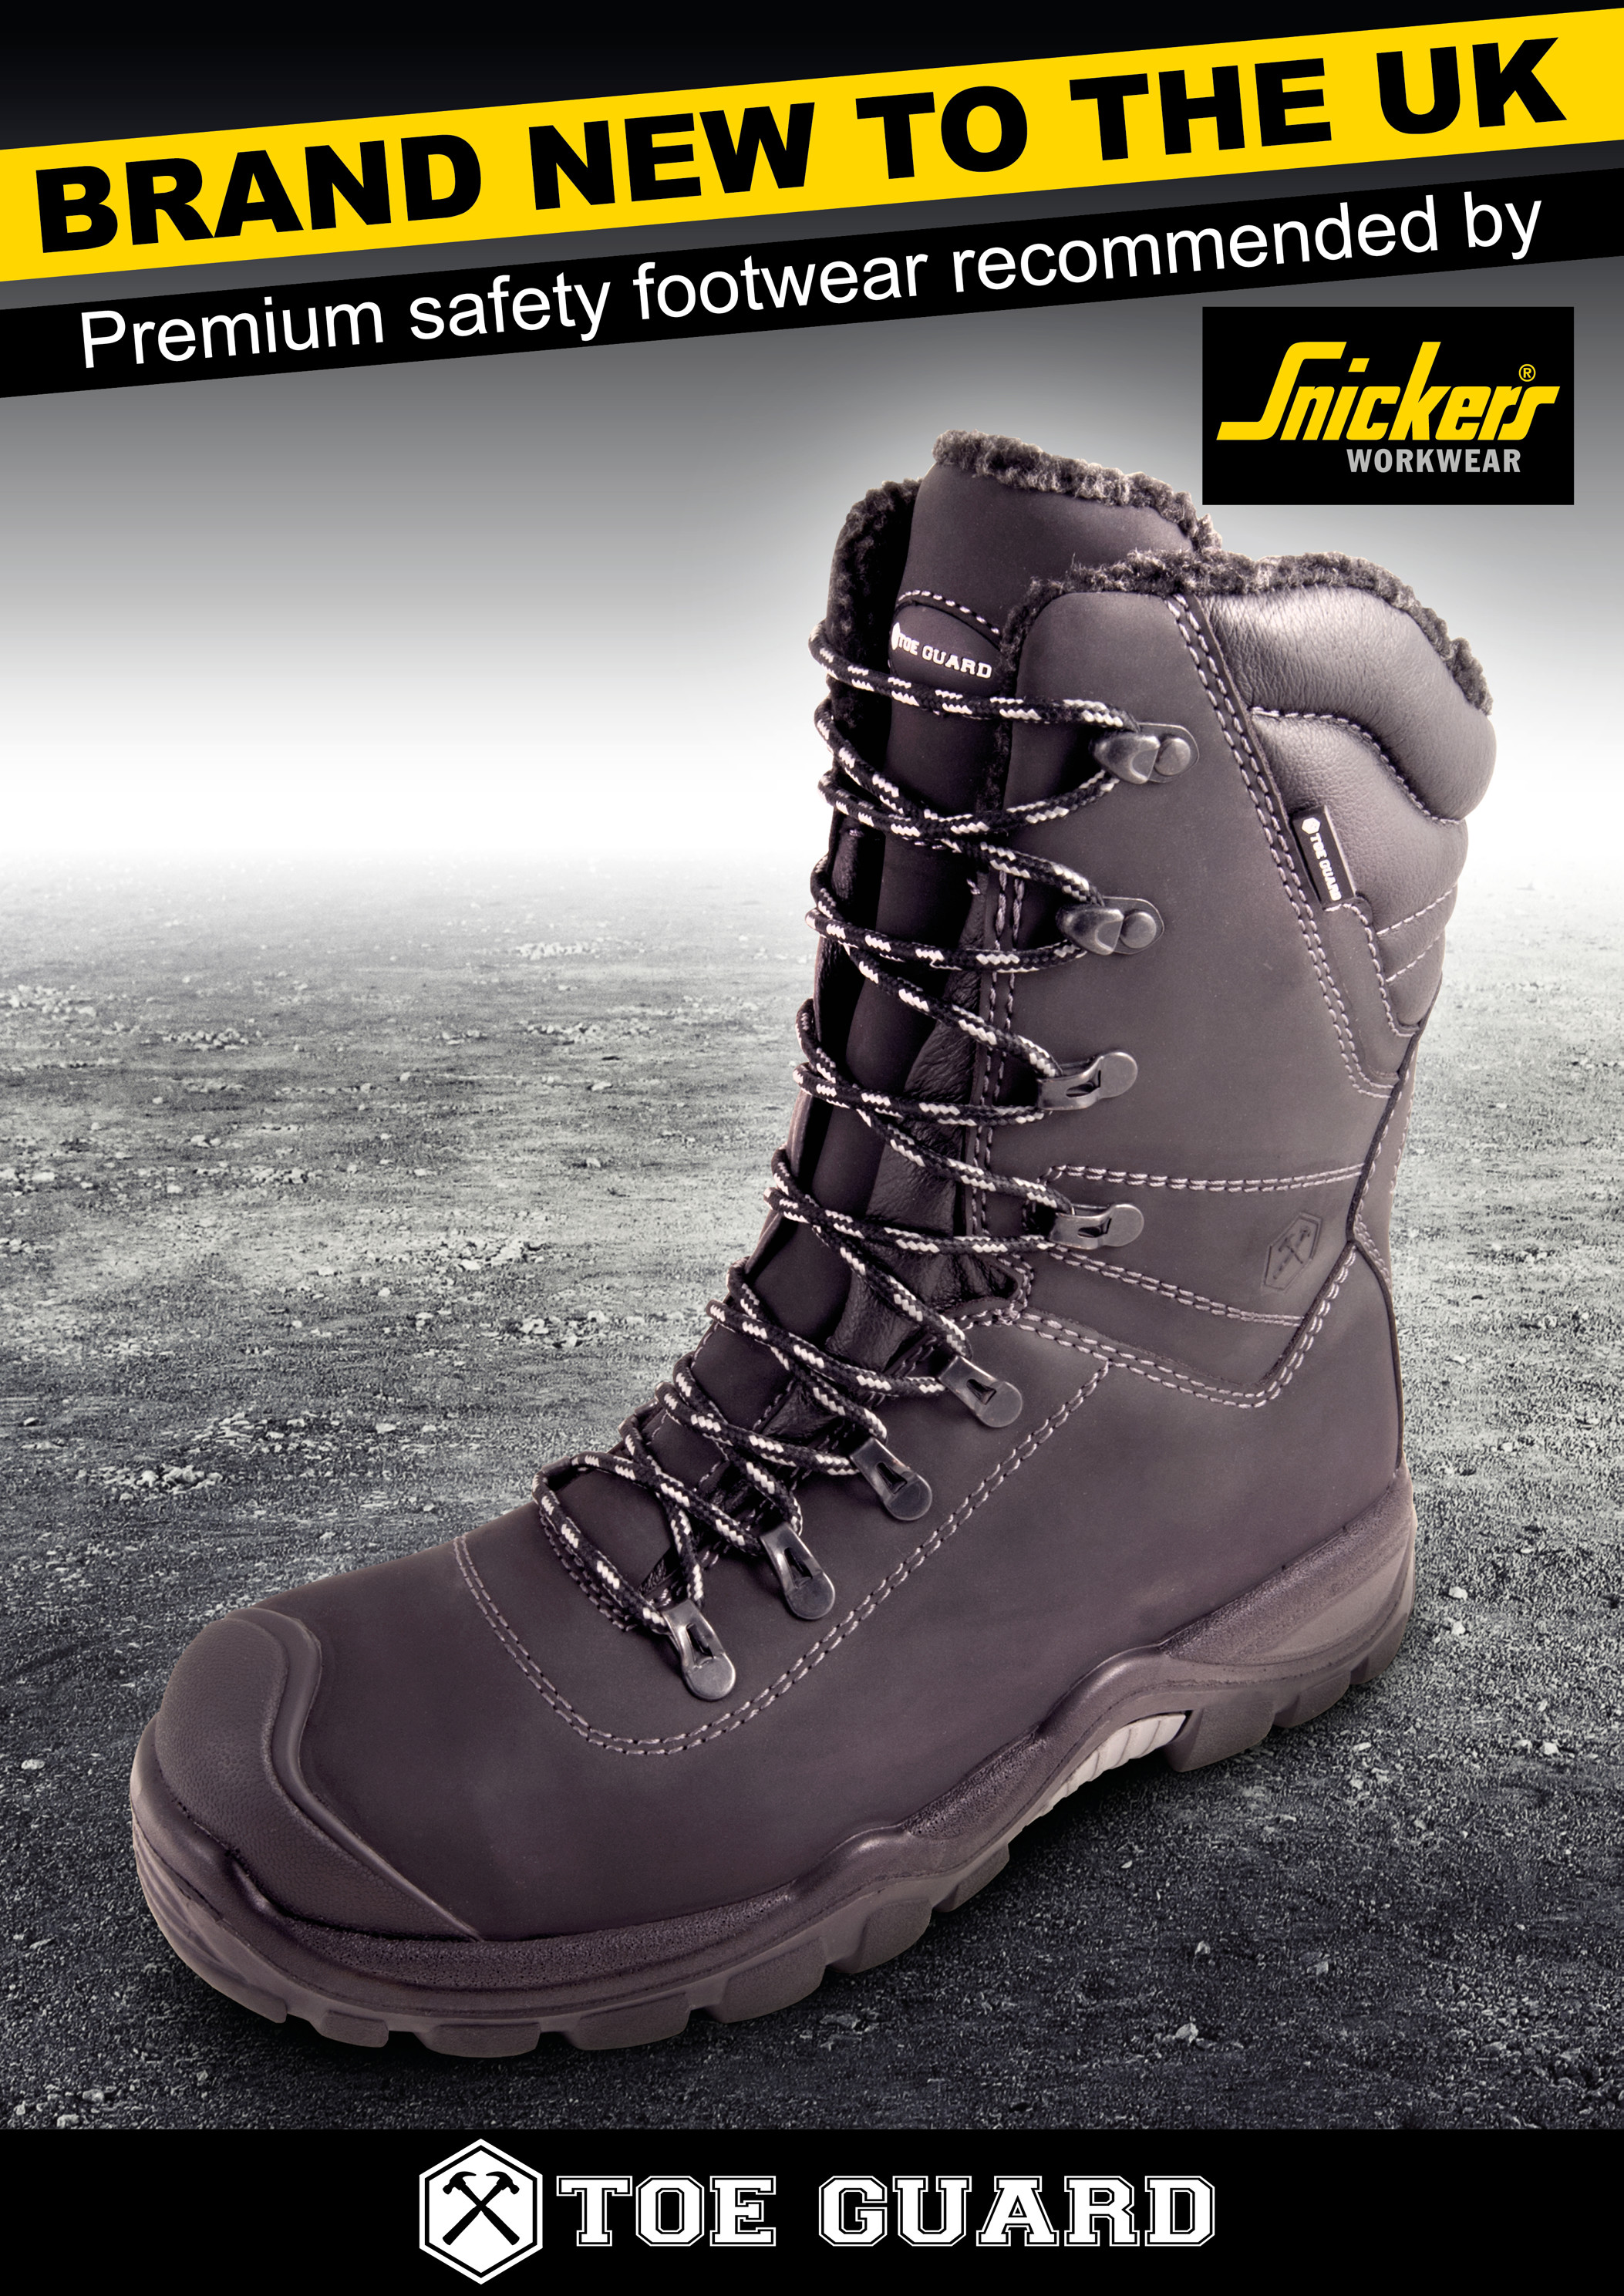 snickers safety boots uk